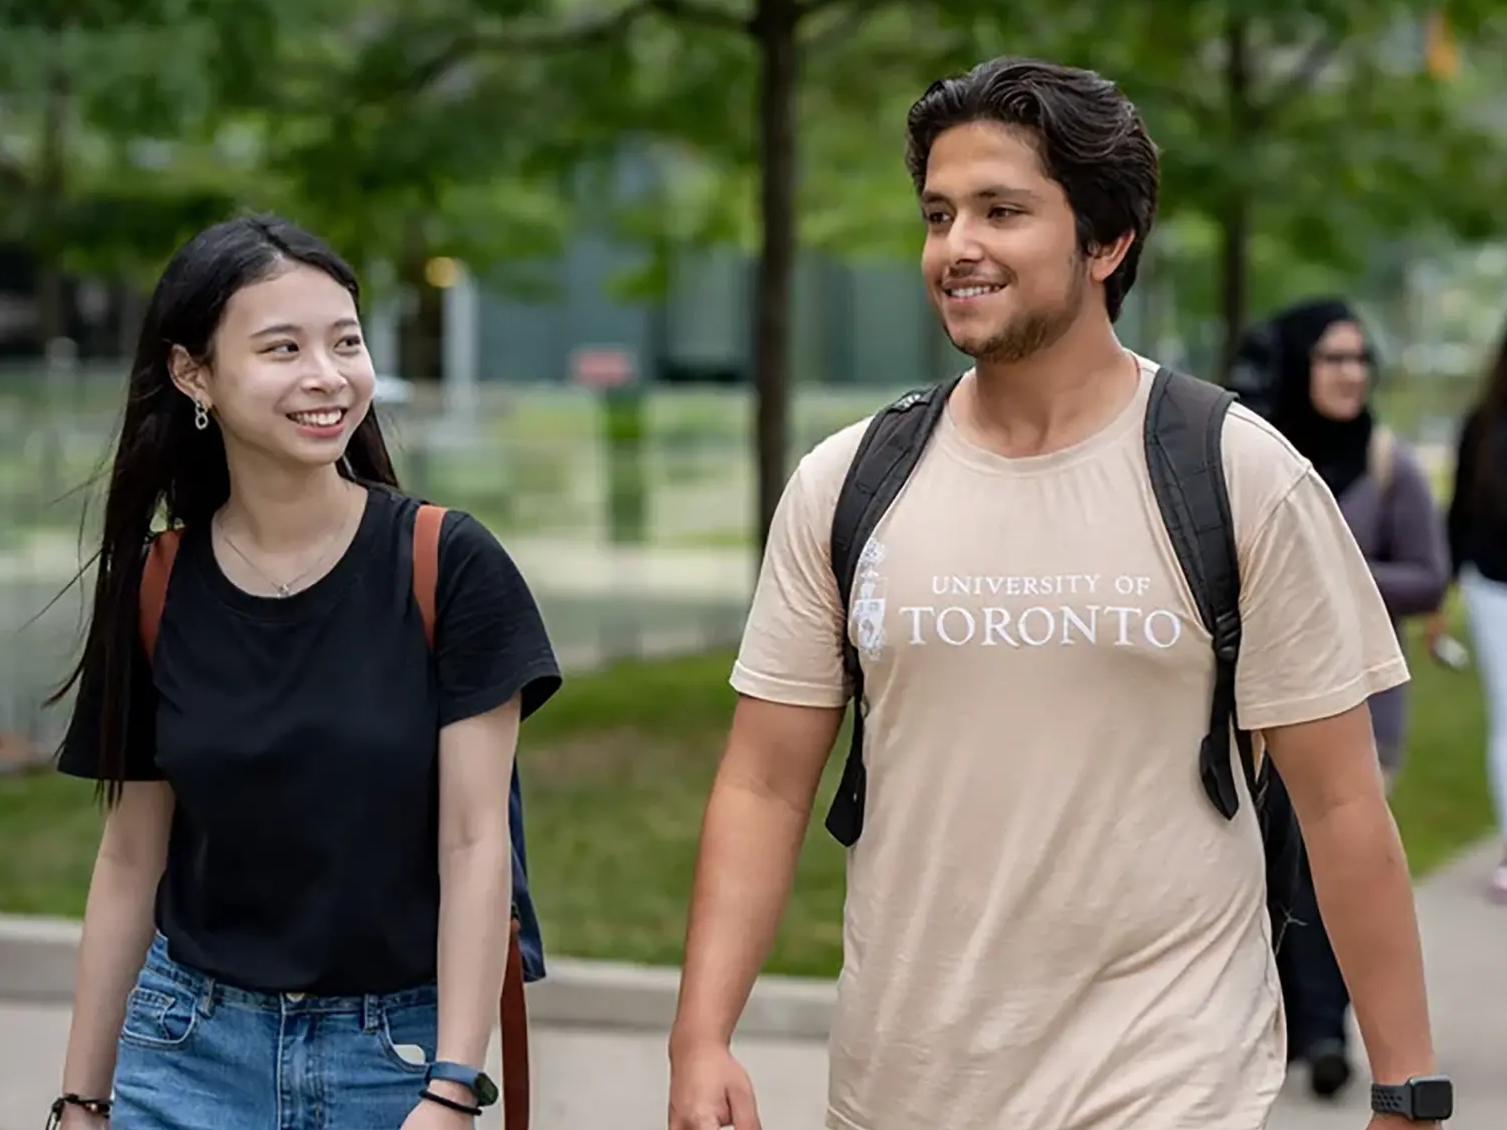 2 UofT students walking in campus